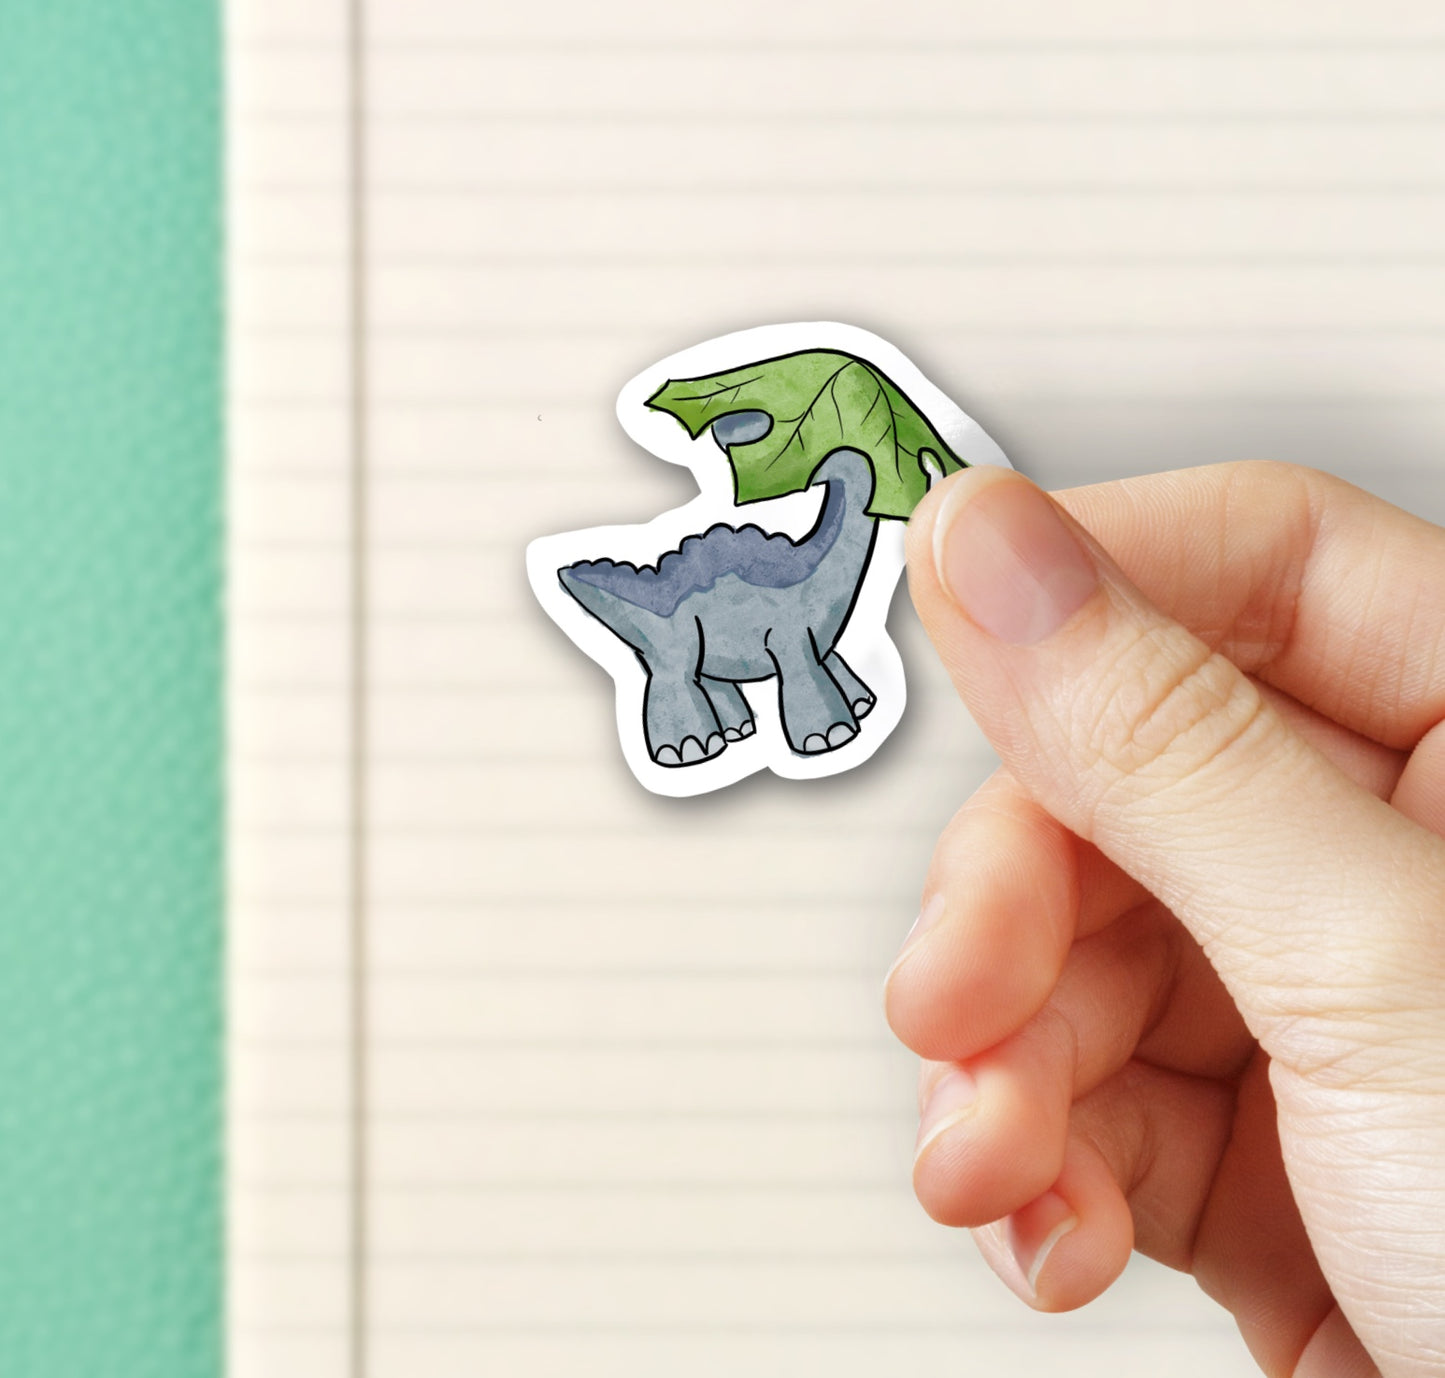 Littlefoot with a Treestar - Land Before Time -  Bubble free sticker